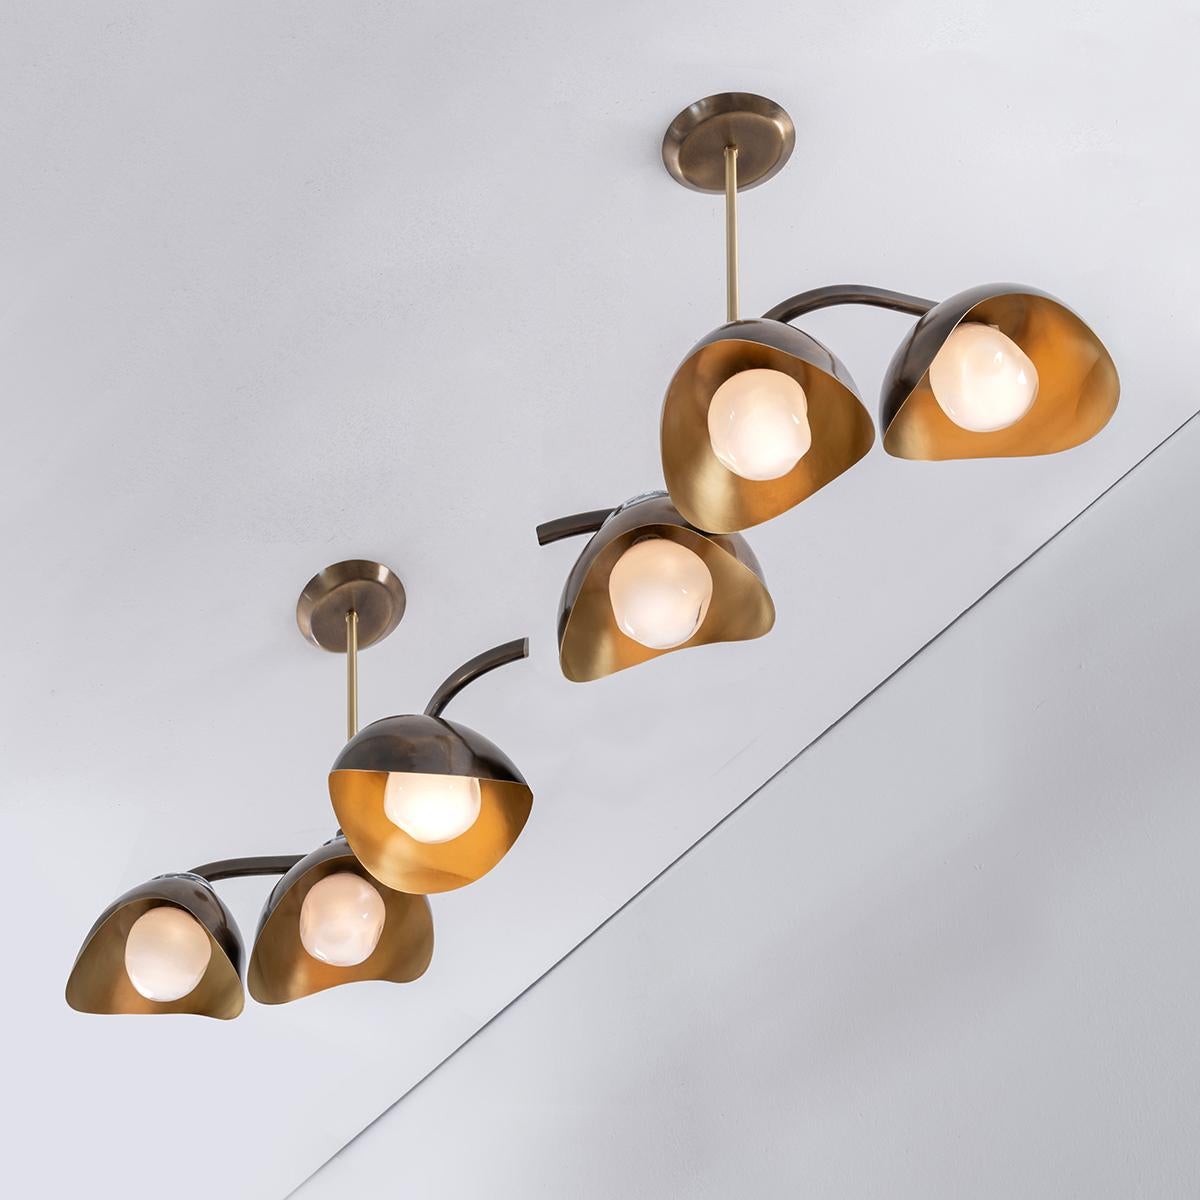 Italian Serpente Tre Ceiling Light by Gaspare Asaro For Sale